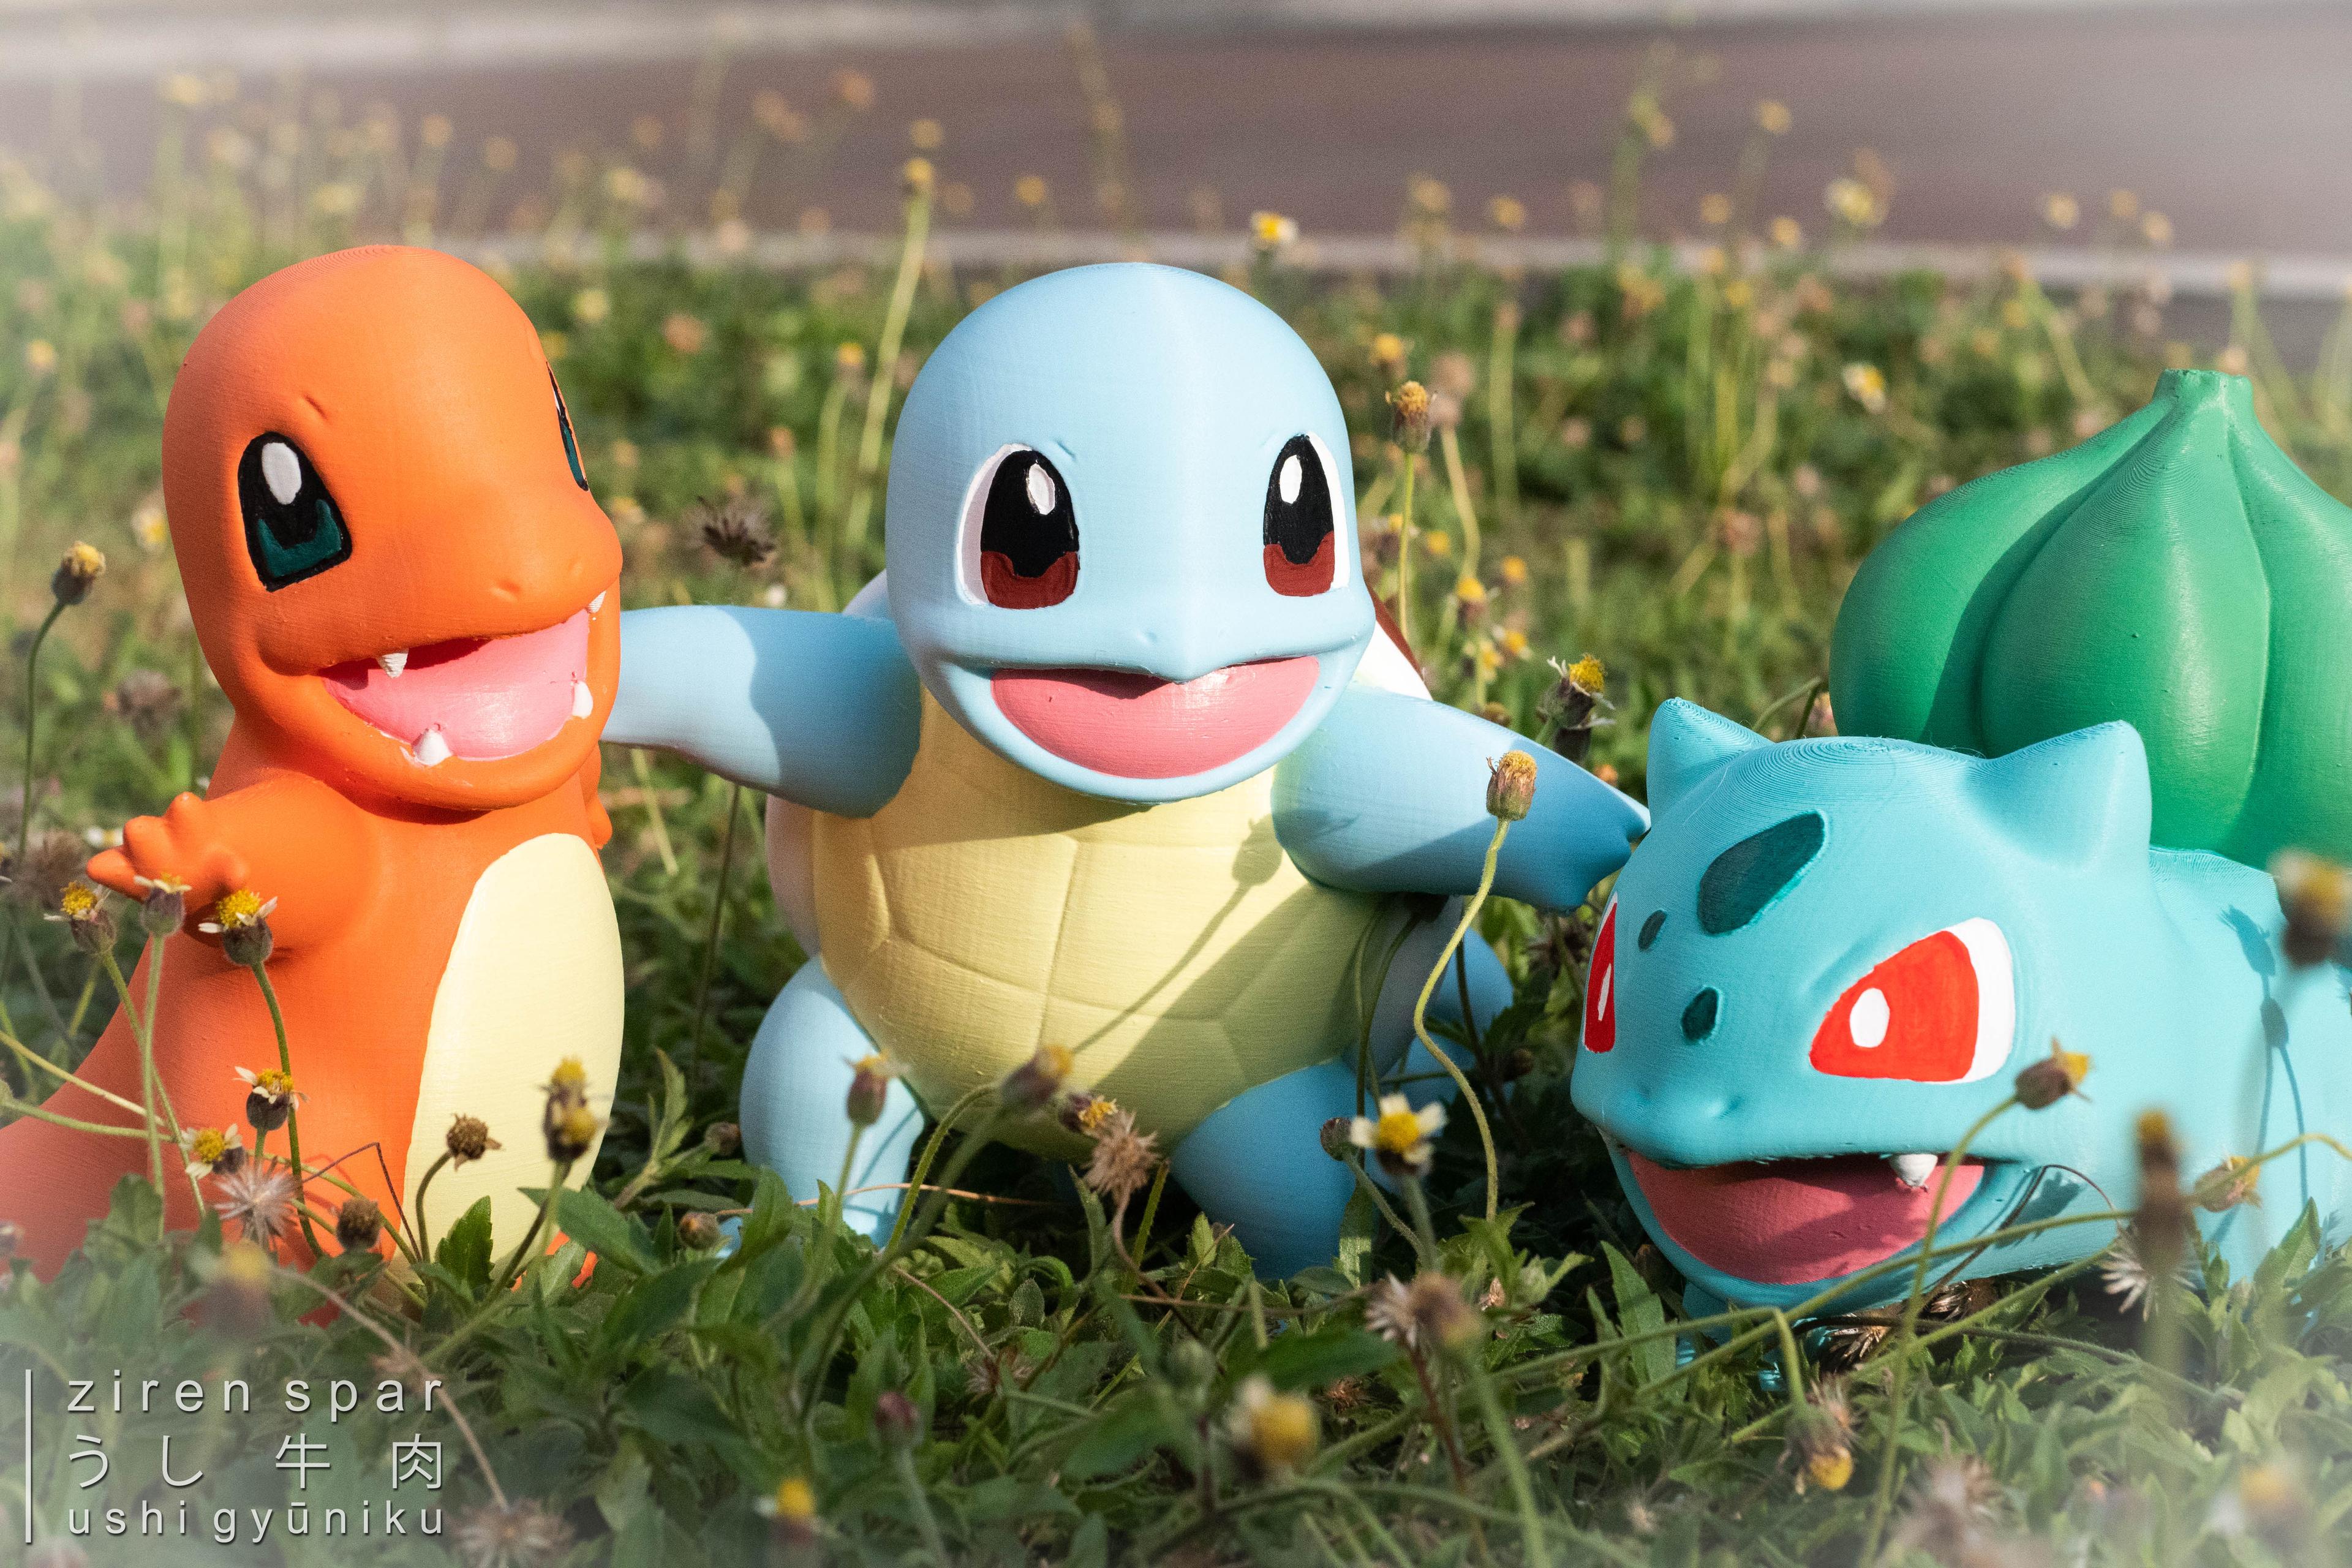 Squirtle(Pokemon) - happy #pokémonDay!
kanto starters will always be special💝💝💝
🧵 polymaker 🤍💙💚💙
🖨️ creality ender 3 pro w/ capricorn tube
📸 gears: niichan 
🧩 assist: touchan & kāchan
🐮 painting & photos by yours truly
#FilamentFebruary - 3d model